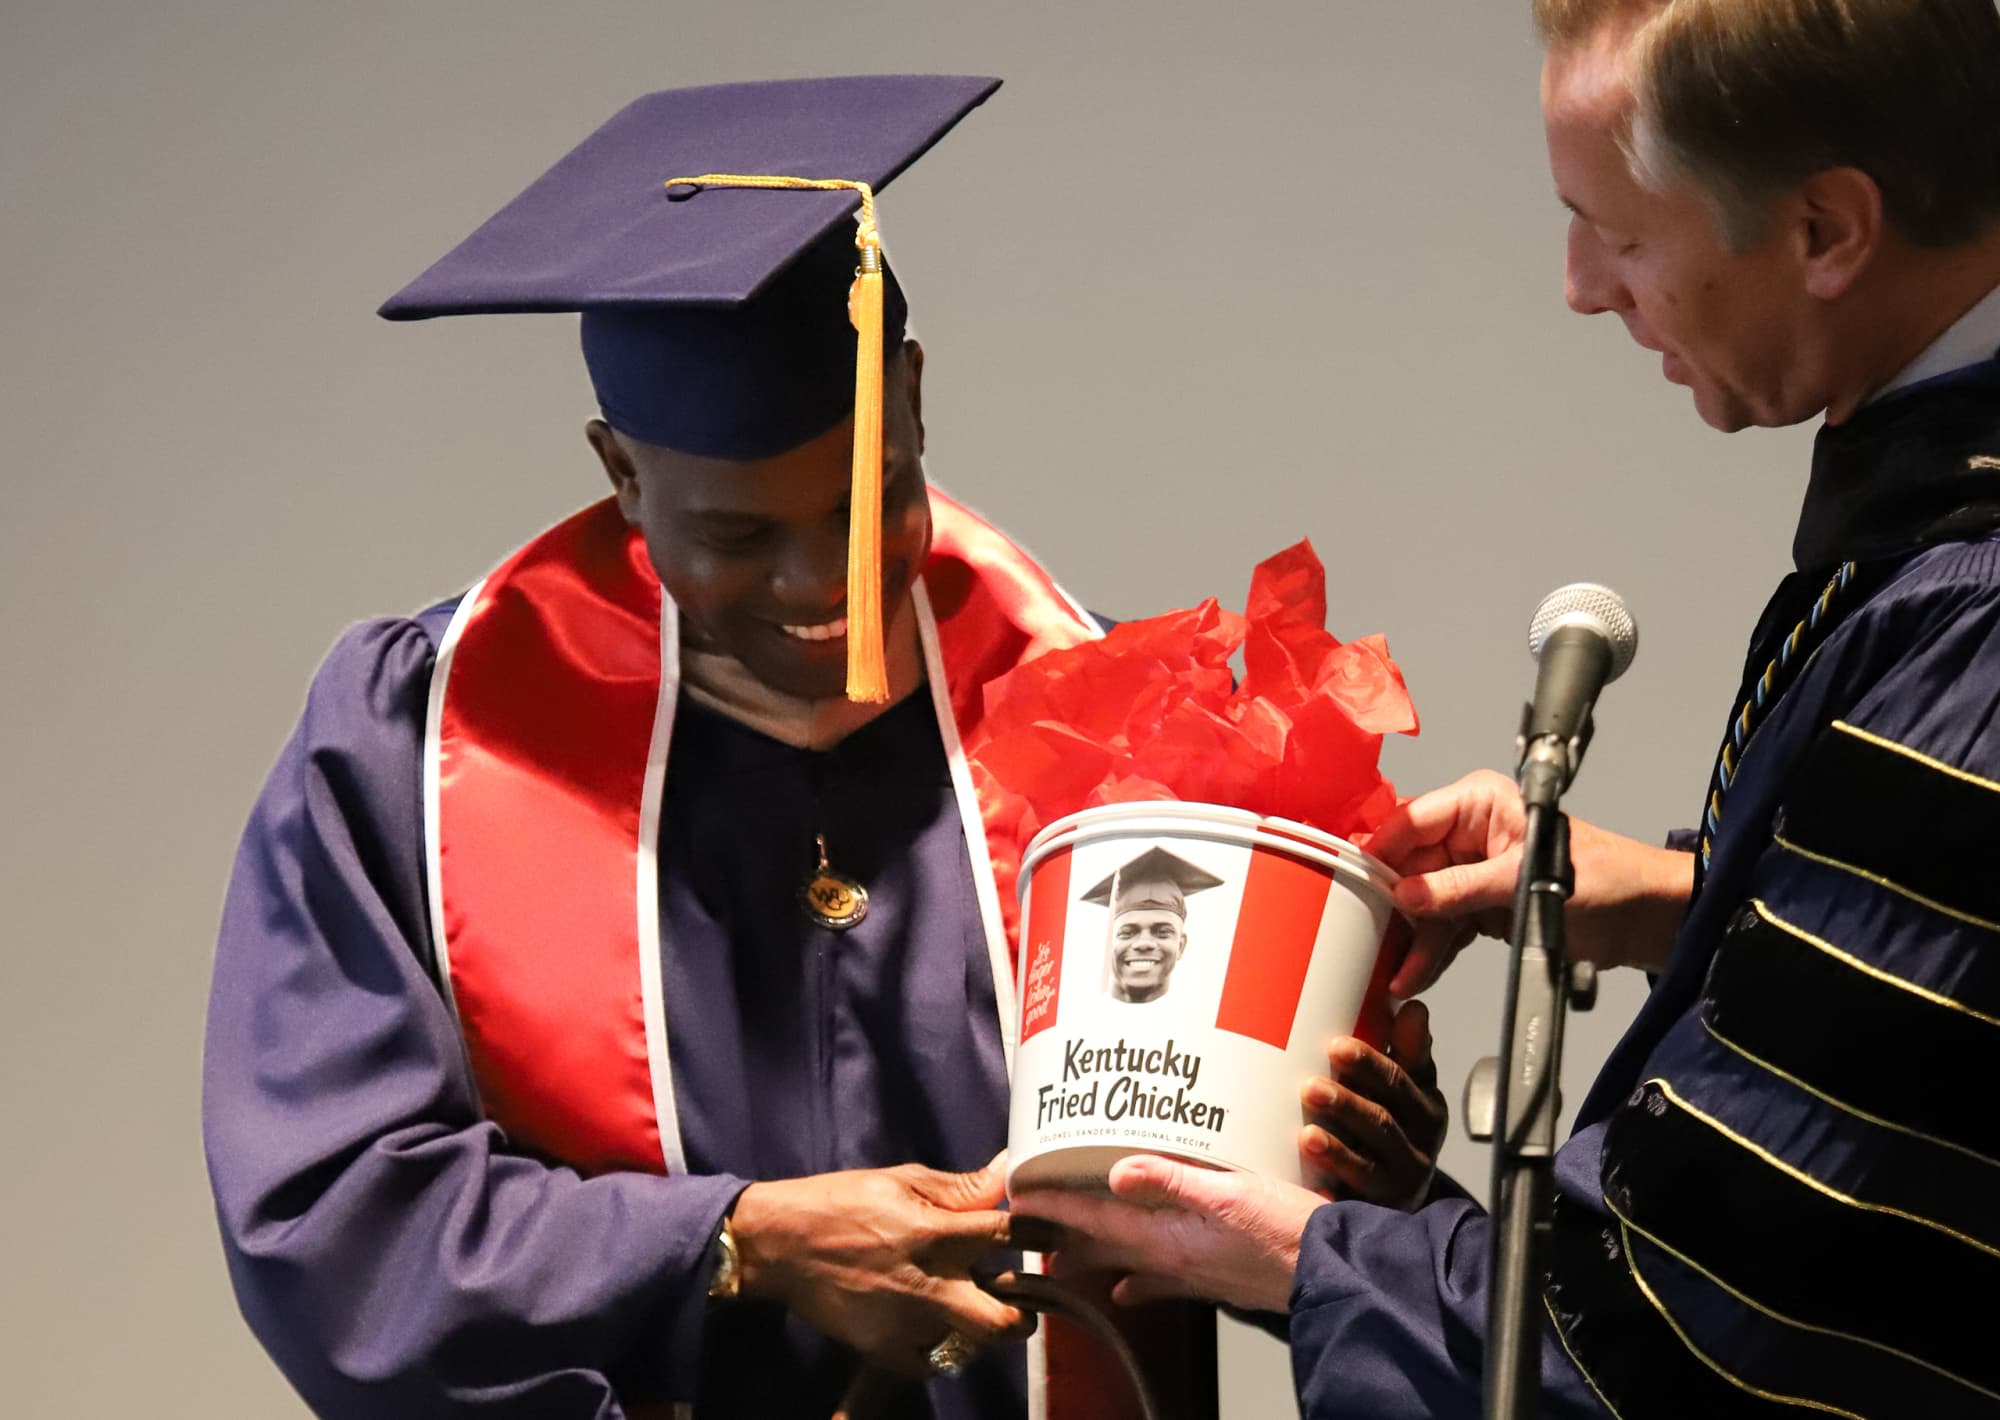 Kevon being awarded at his graduation ceremony.